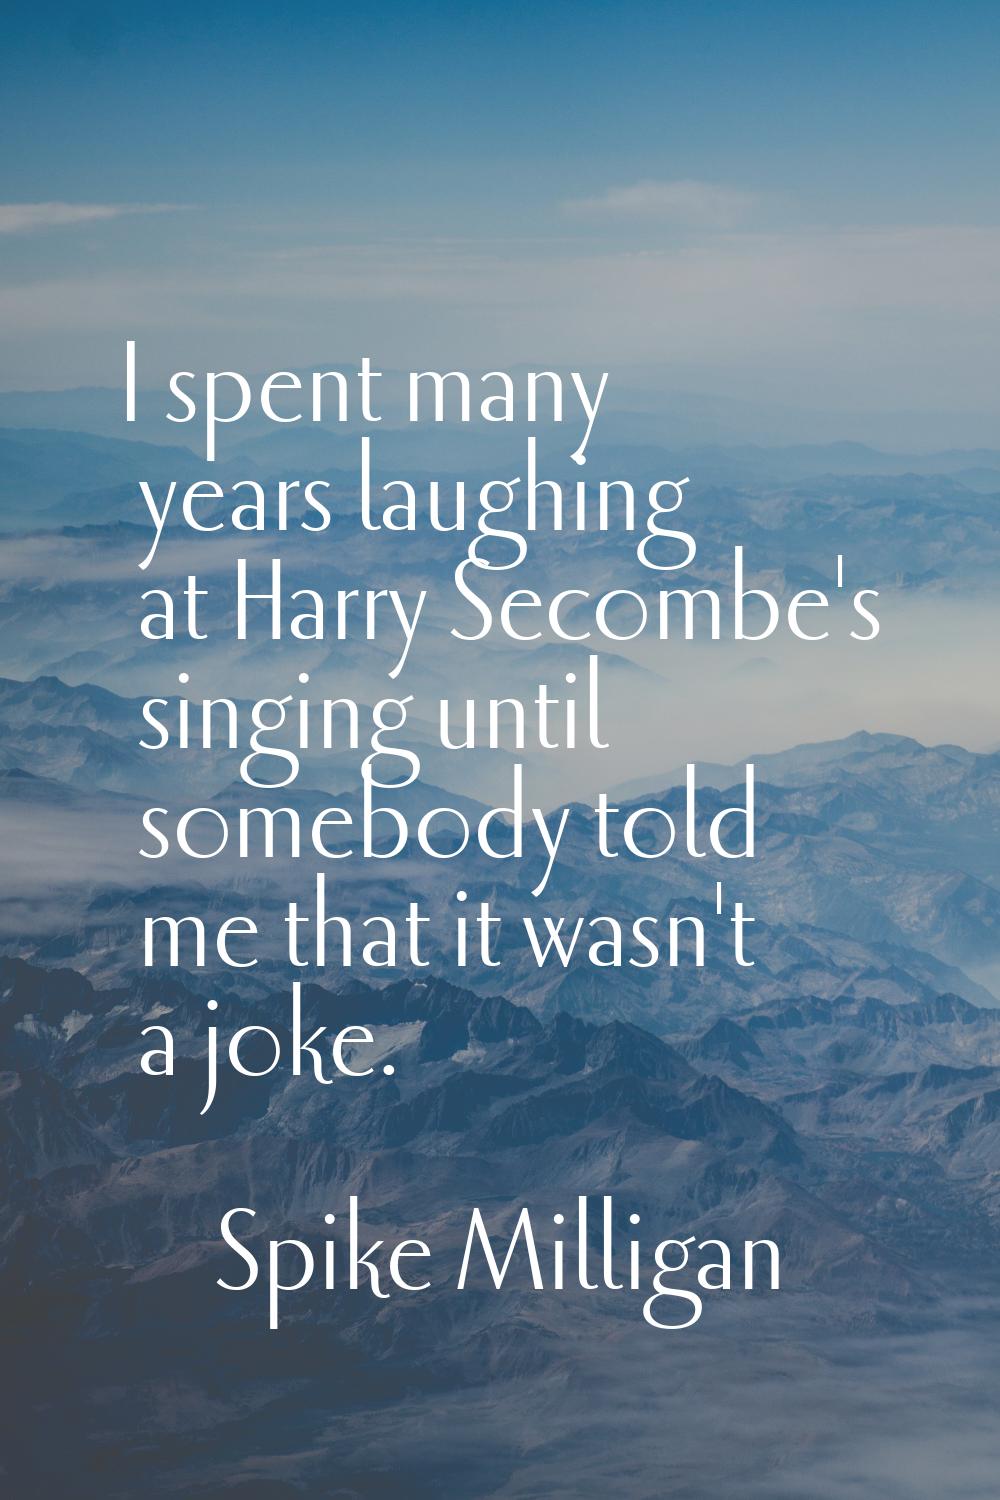 I spent many years laughing at Harry Secombe's singing until somebody told me that it wasn't a joke